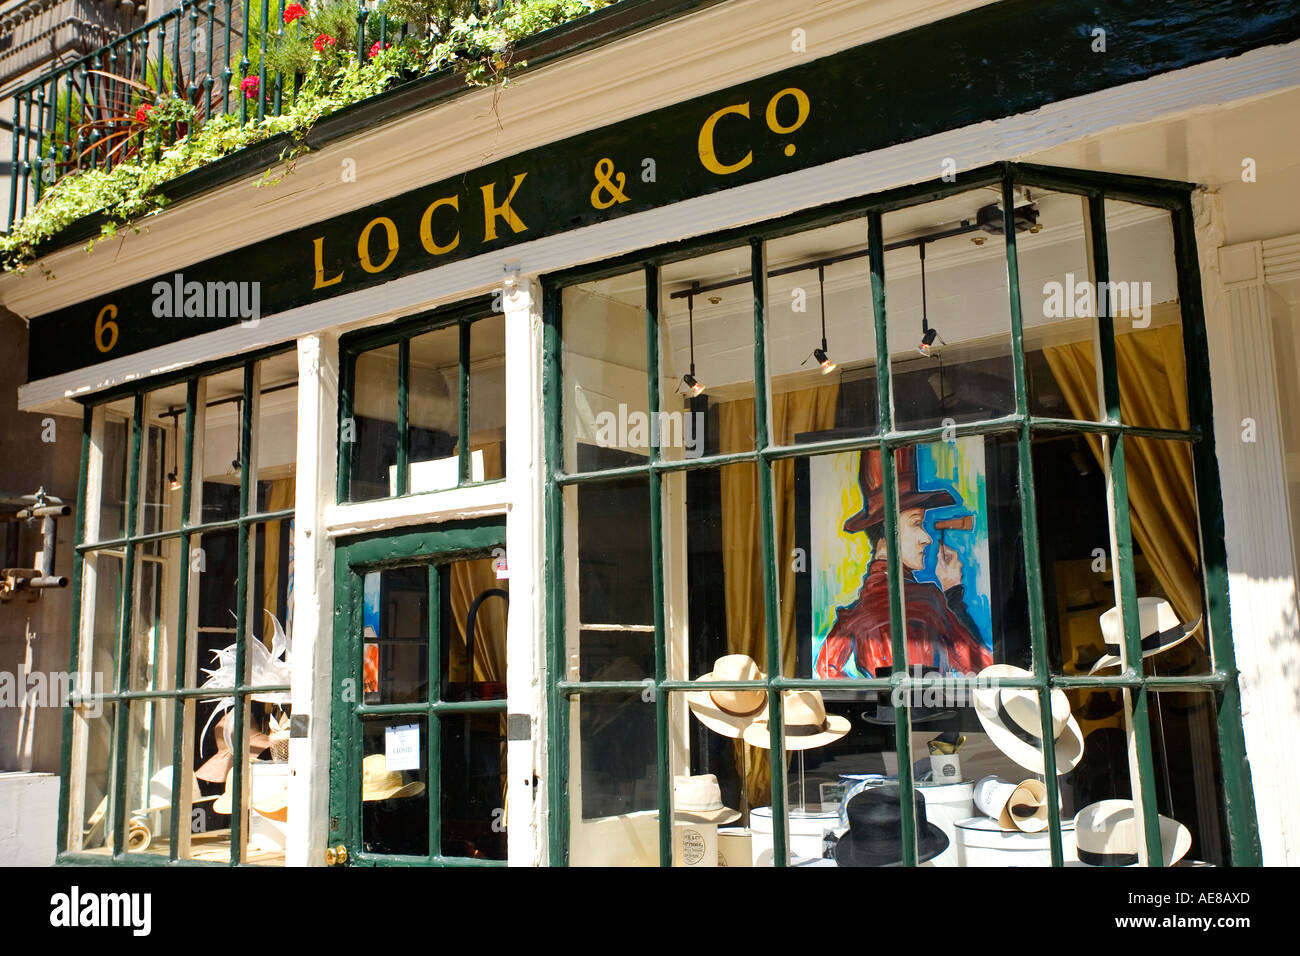 Lock and Co the famous hat makers in London England Stock Photo